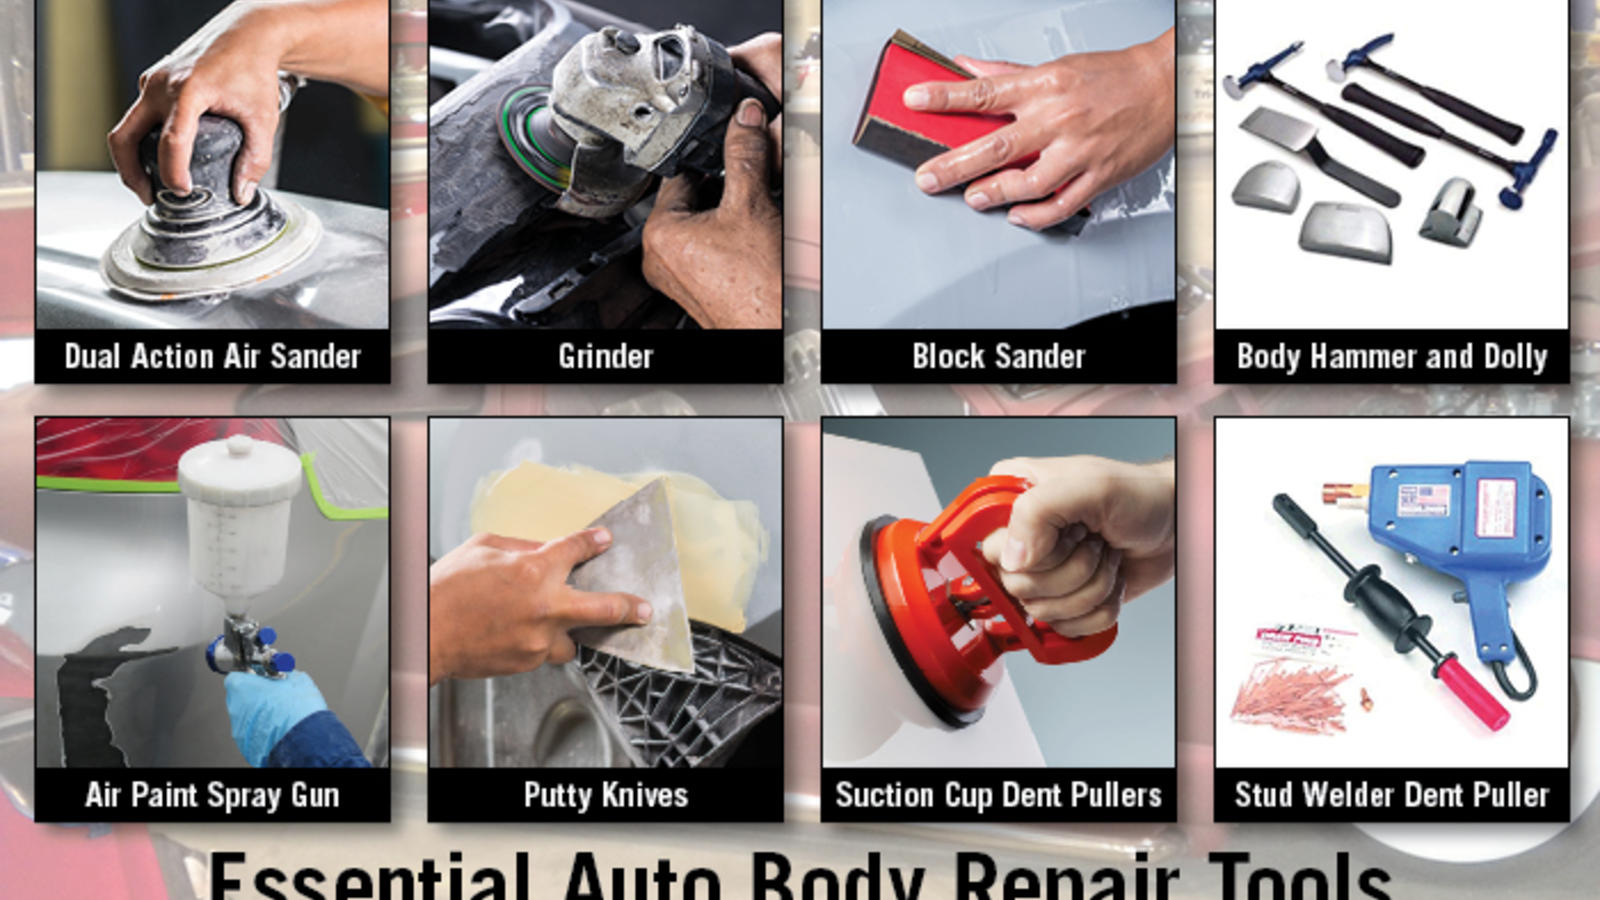 Essential Auto Body Tools Used in the Collision Industry